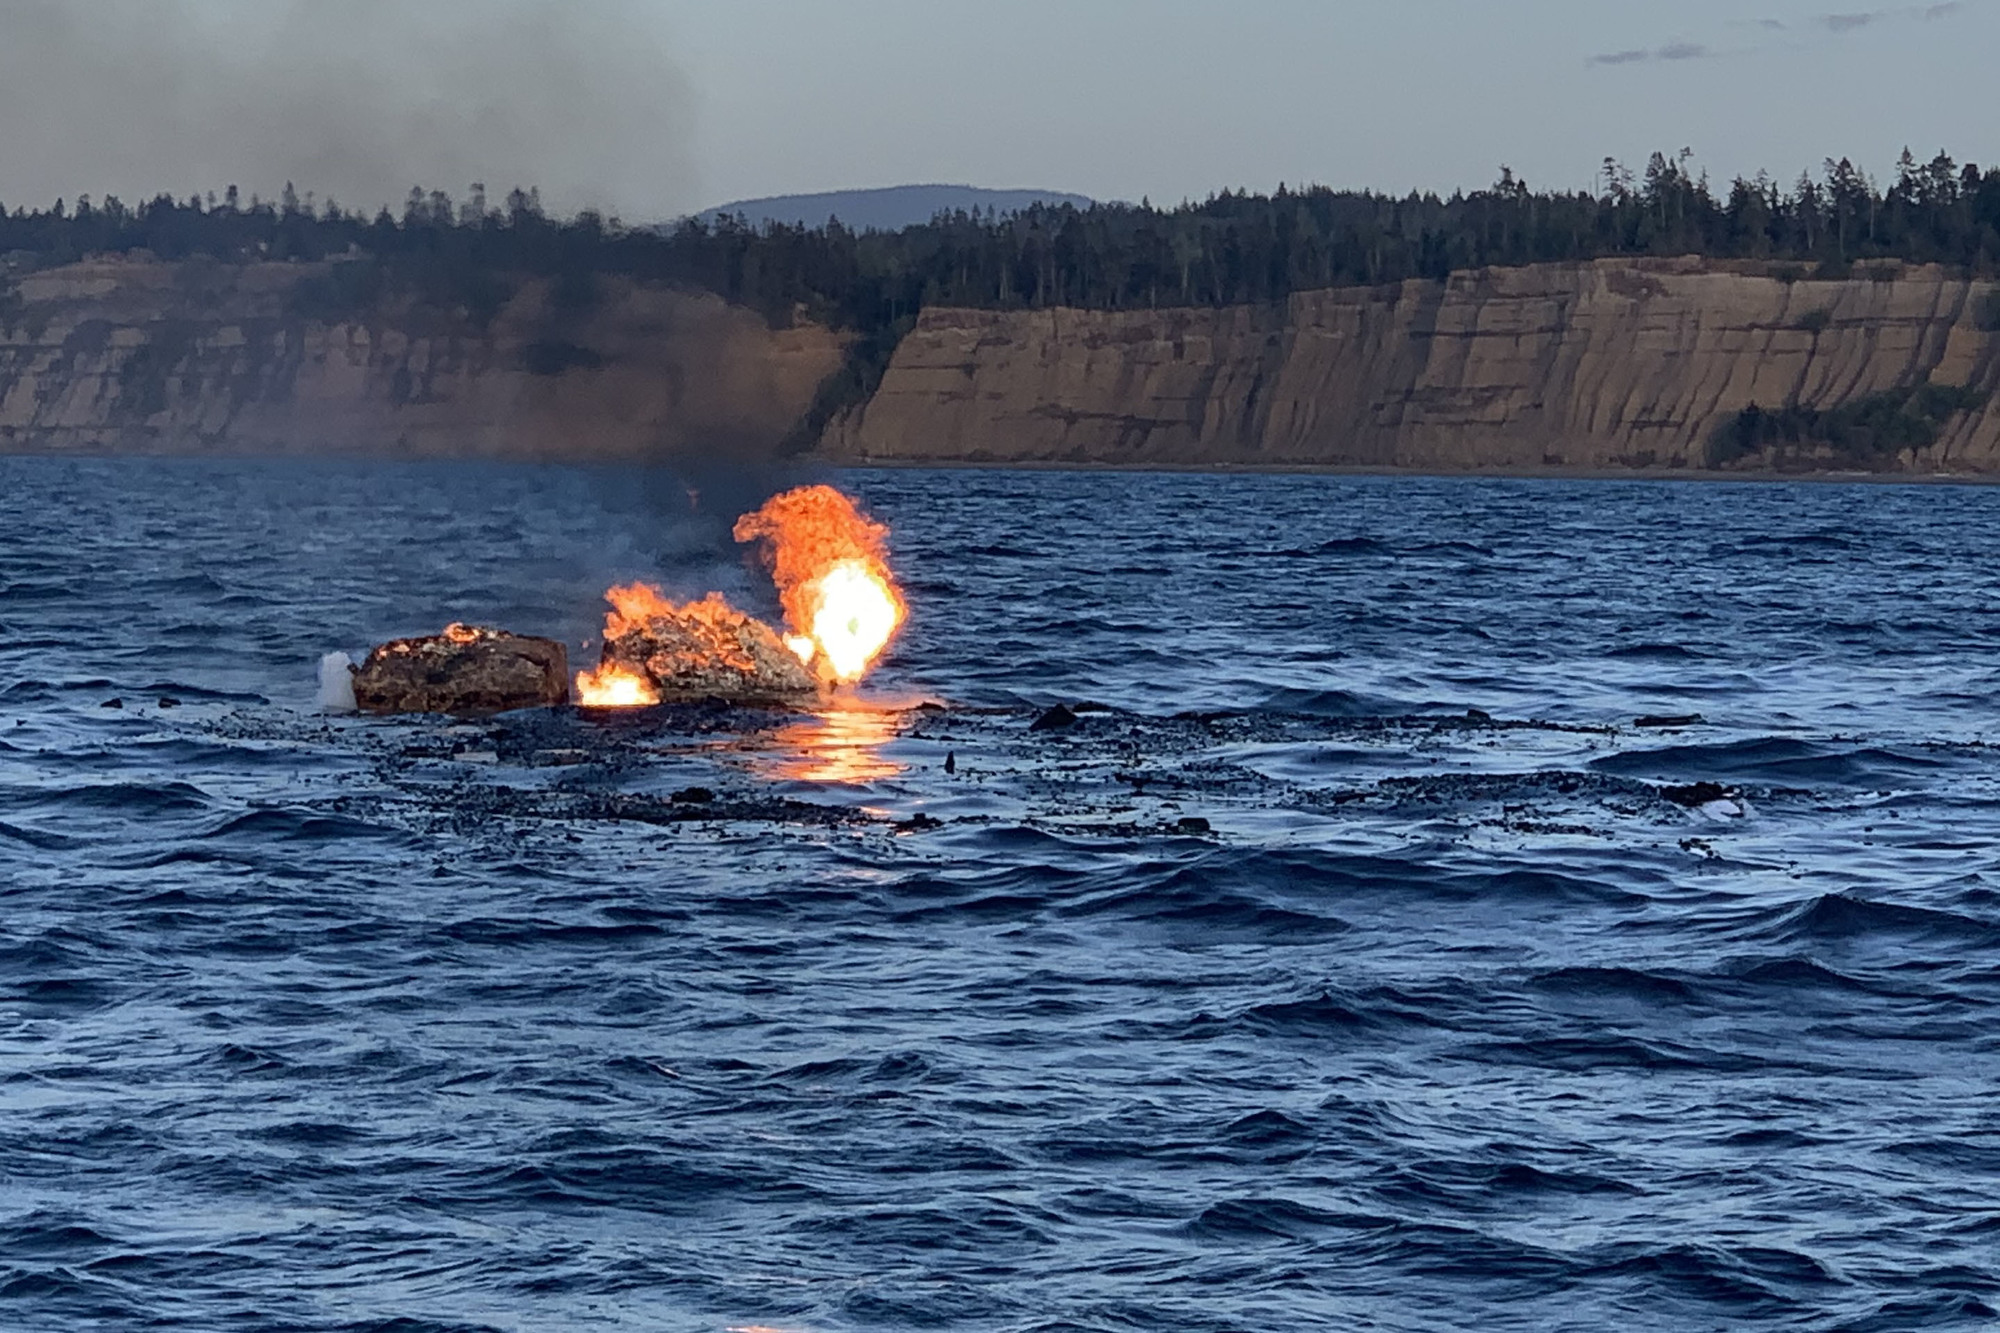 Coast Guard rescues 3 from boat fire near Port Angeles, WA